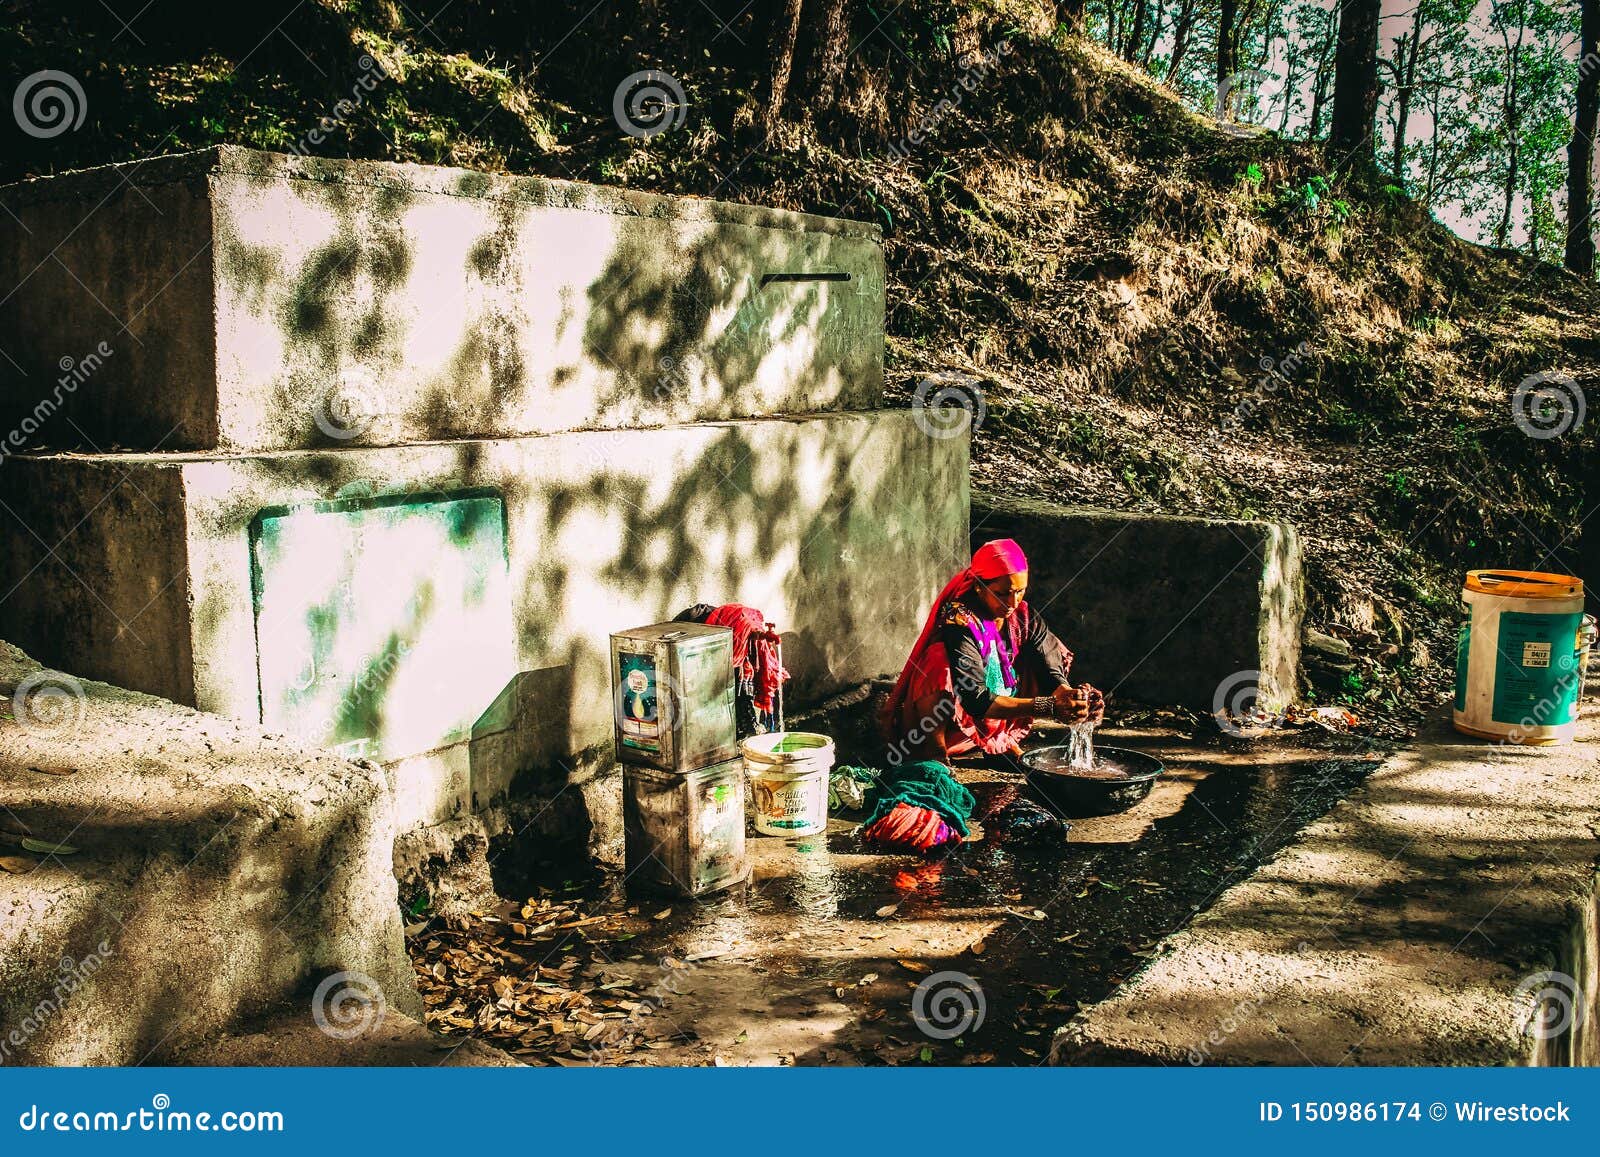 Indian Lady Doing Hand Laundry Editorial Stock Image ...